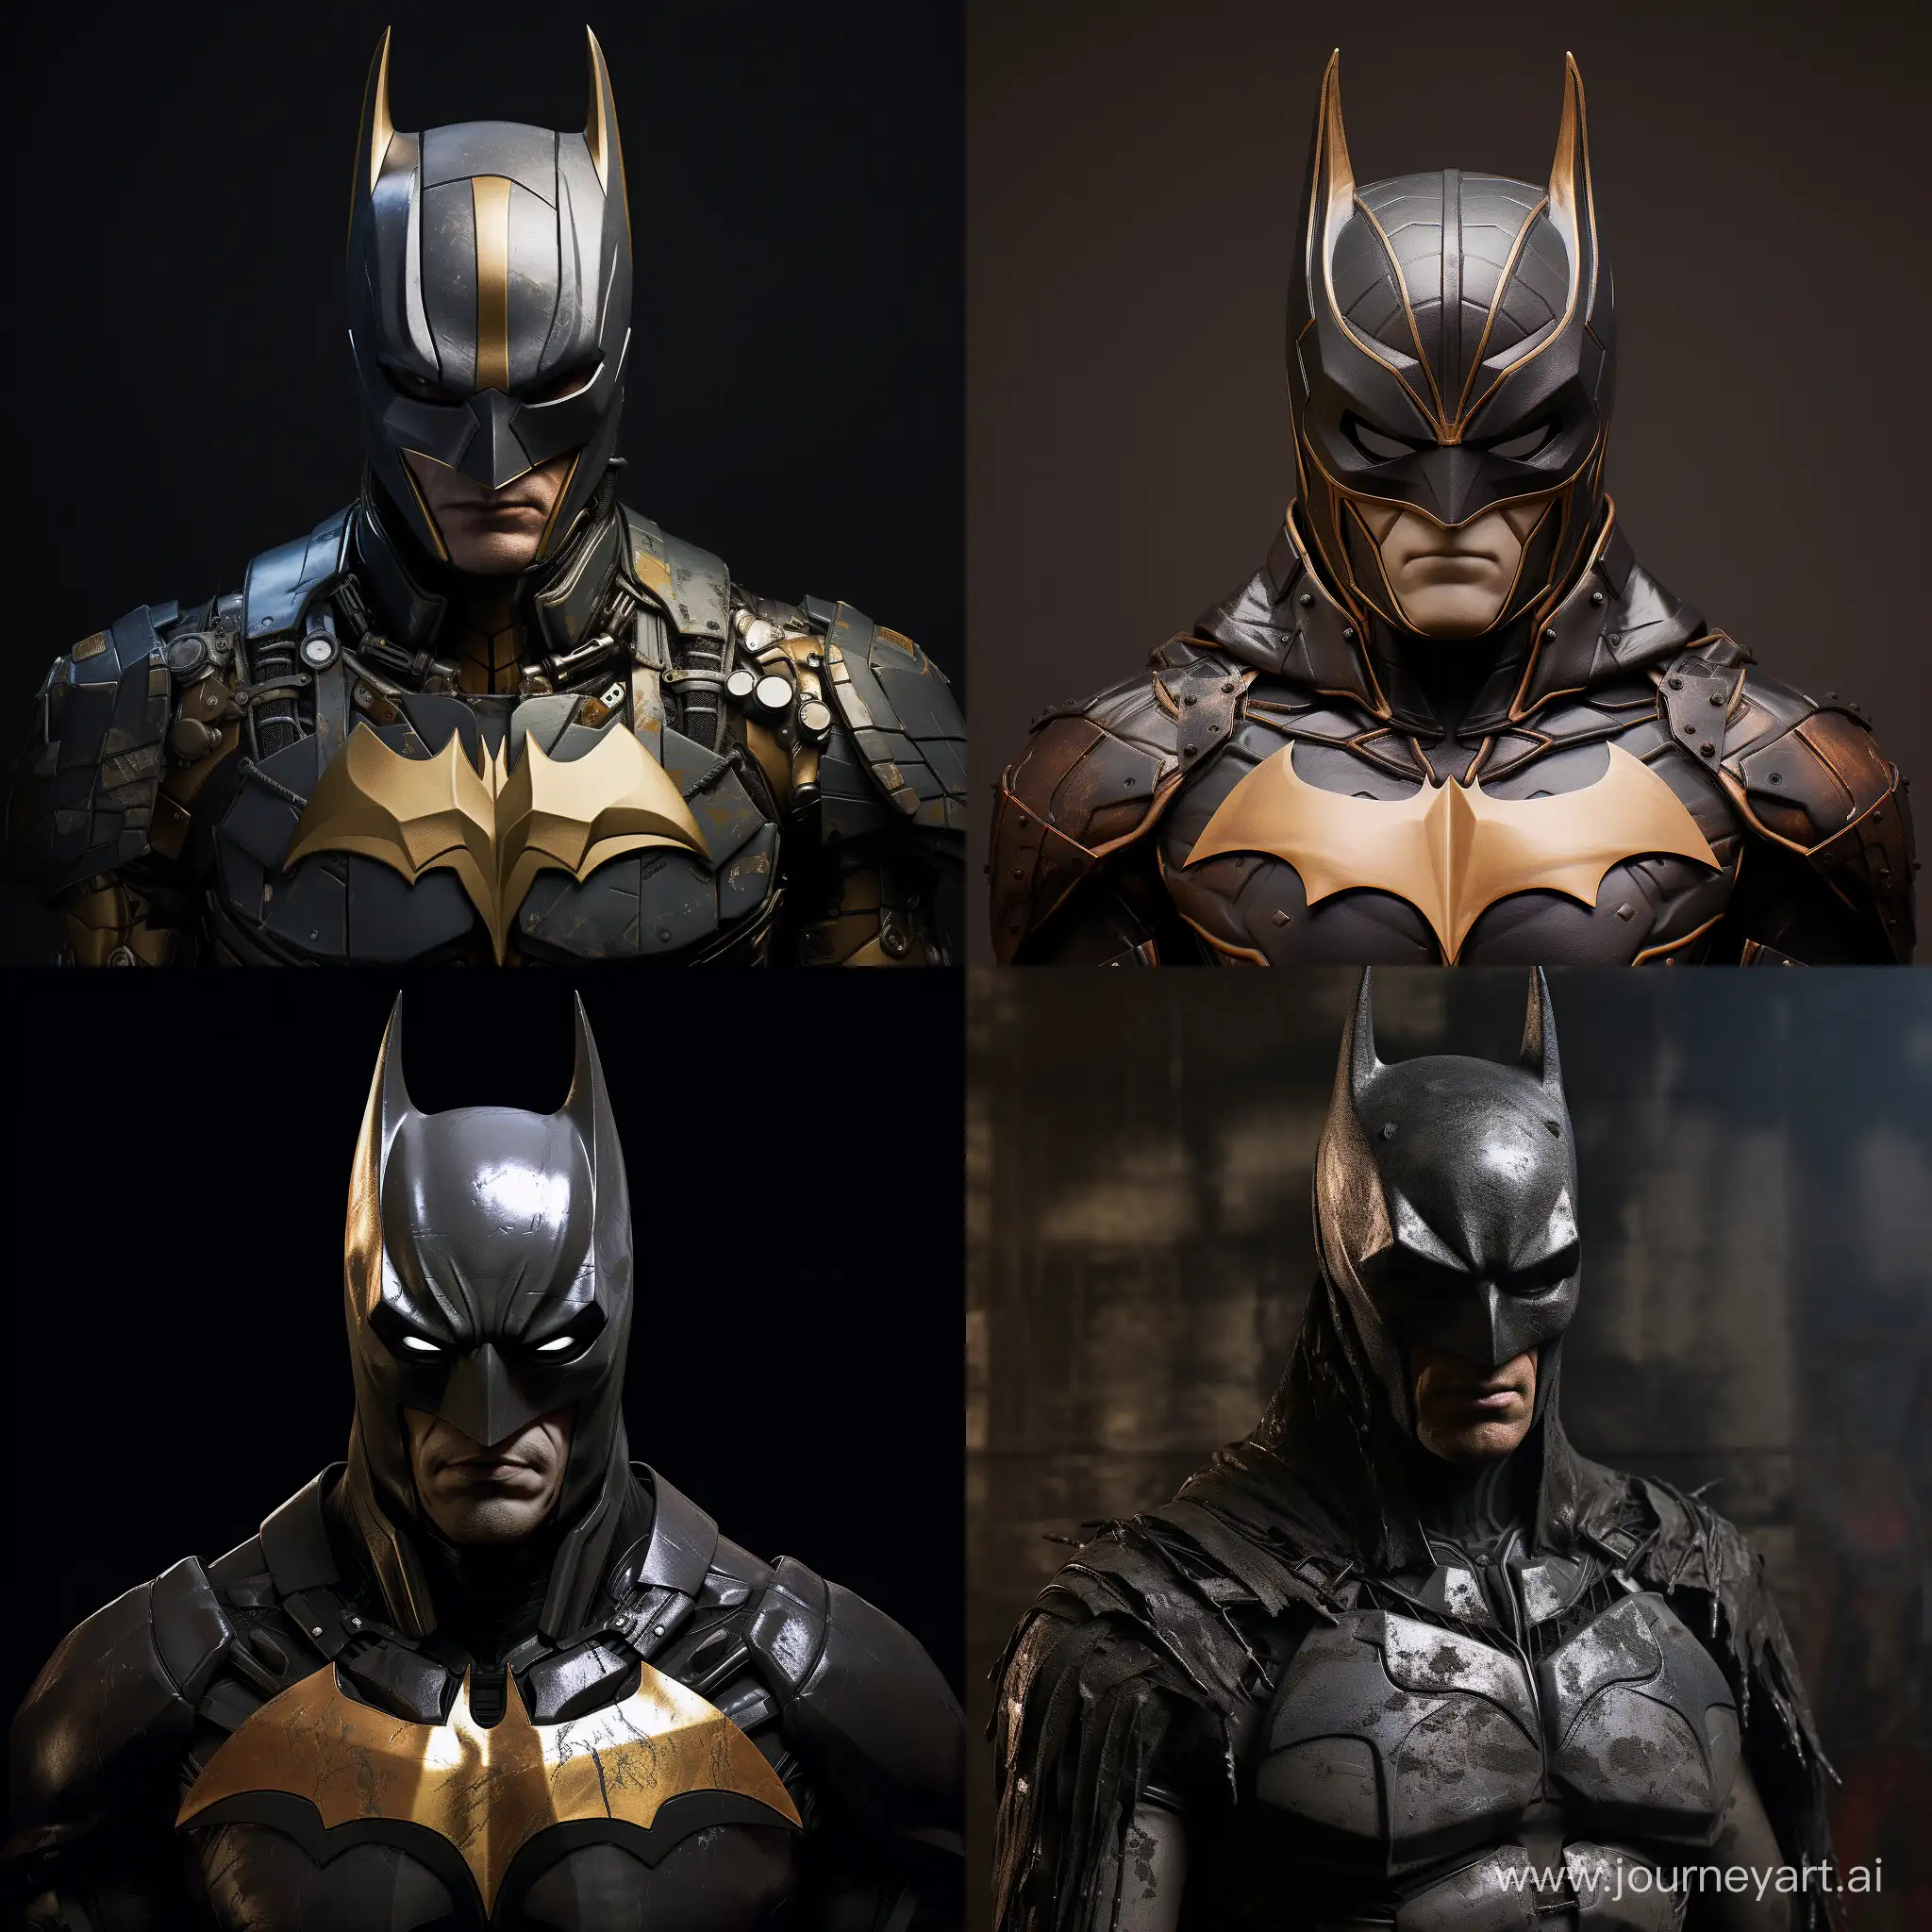 Masked-Batman-Action-Figure-with-11-Scale-Limited-Edition-Collectible